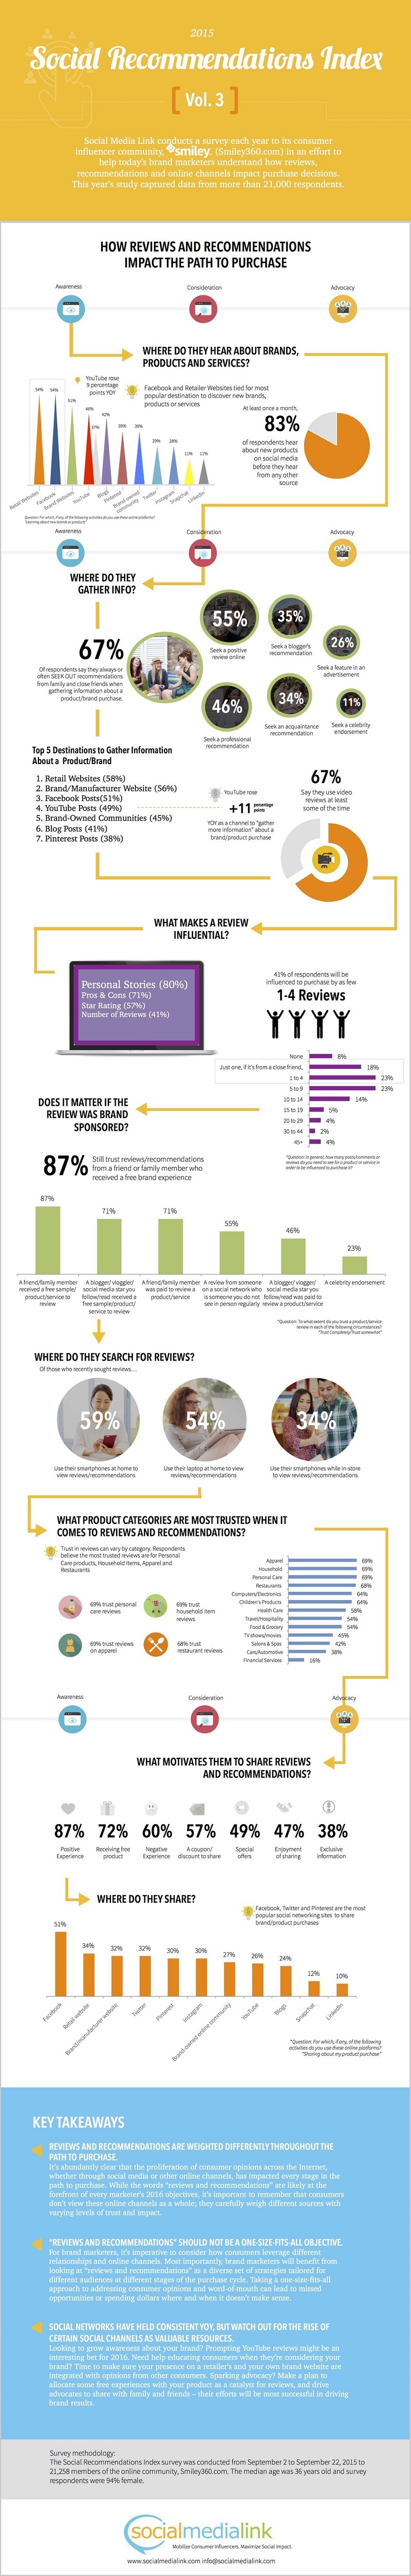 Infographic Social Recommendations Index